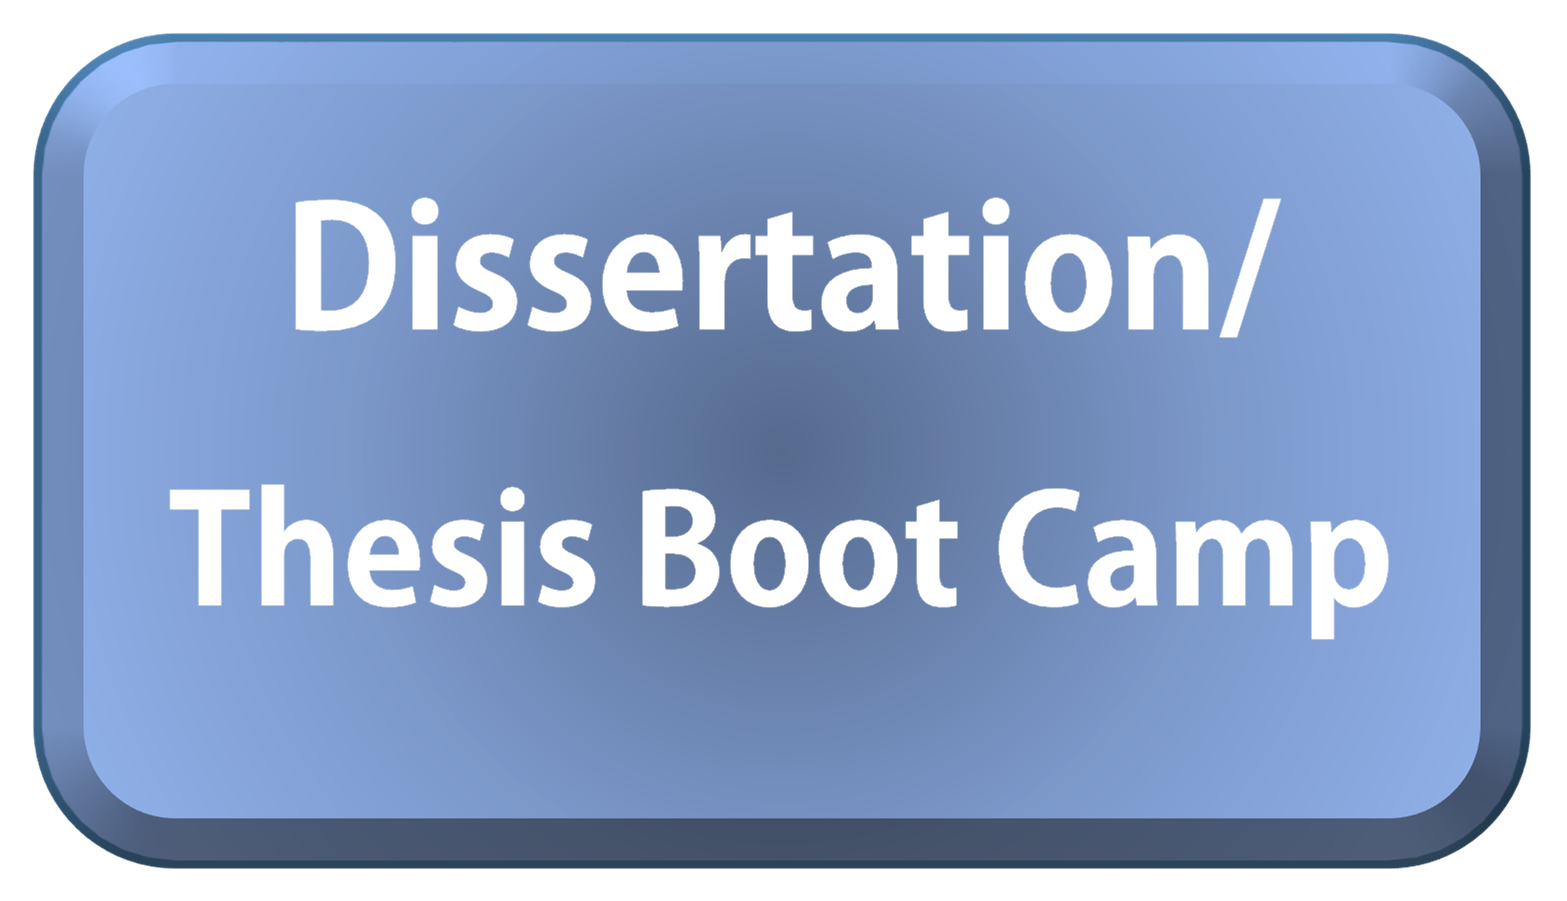 DTBC Logo: A logo for the Dissertation Thesis Boot Camp.